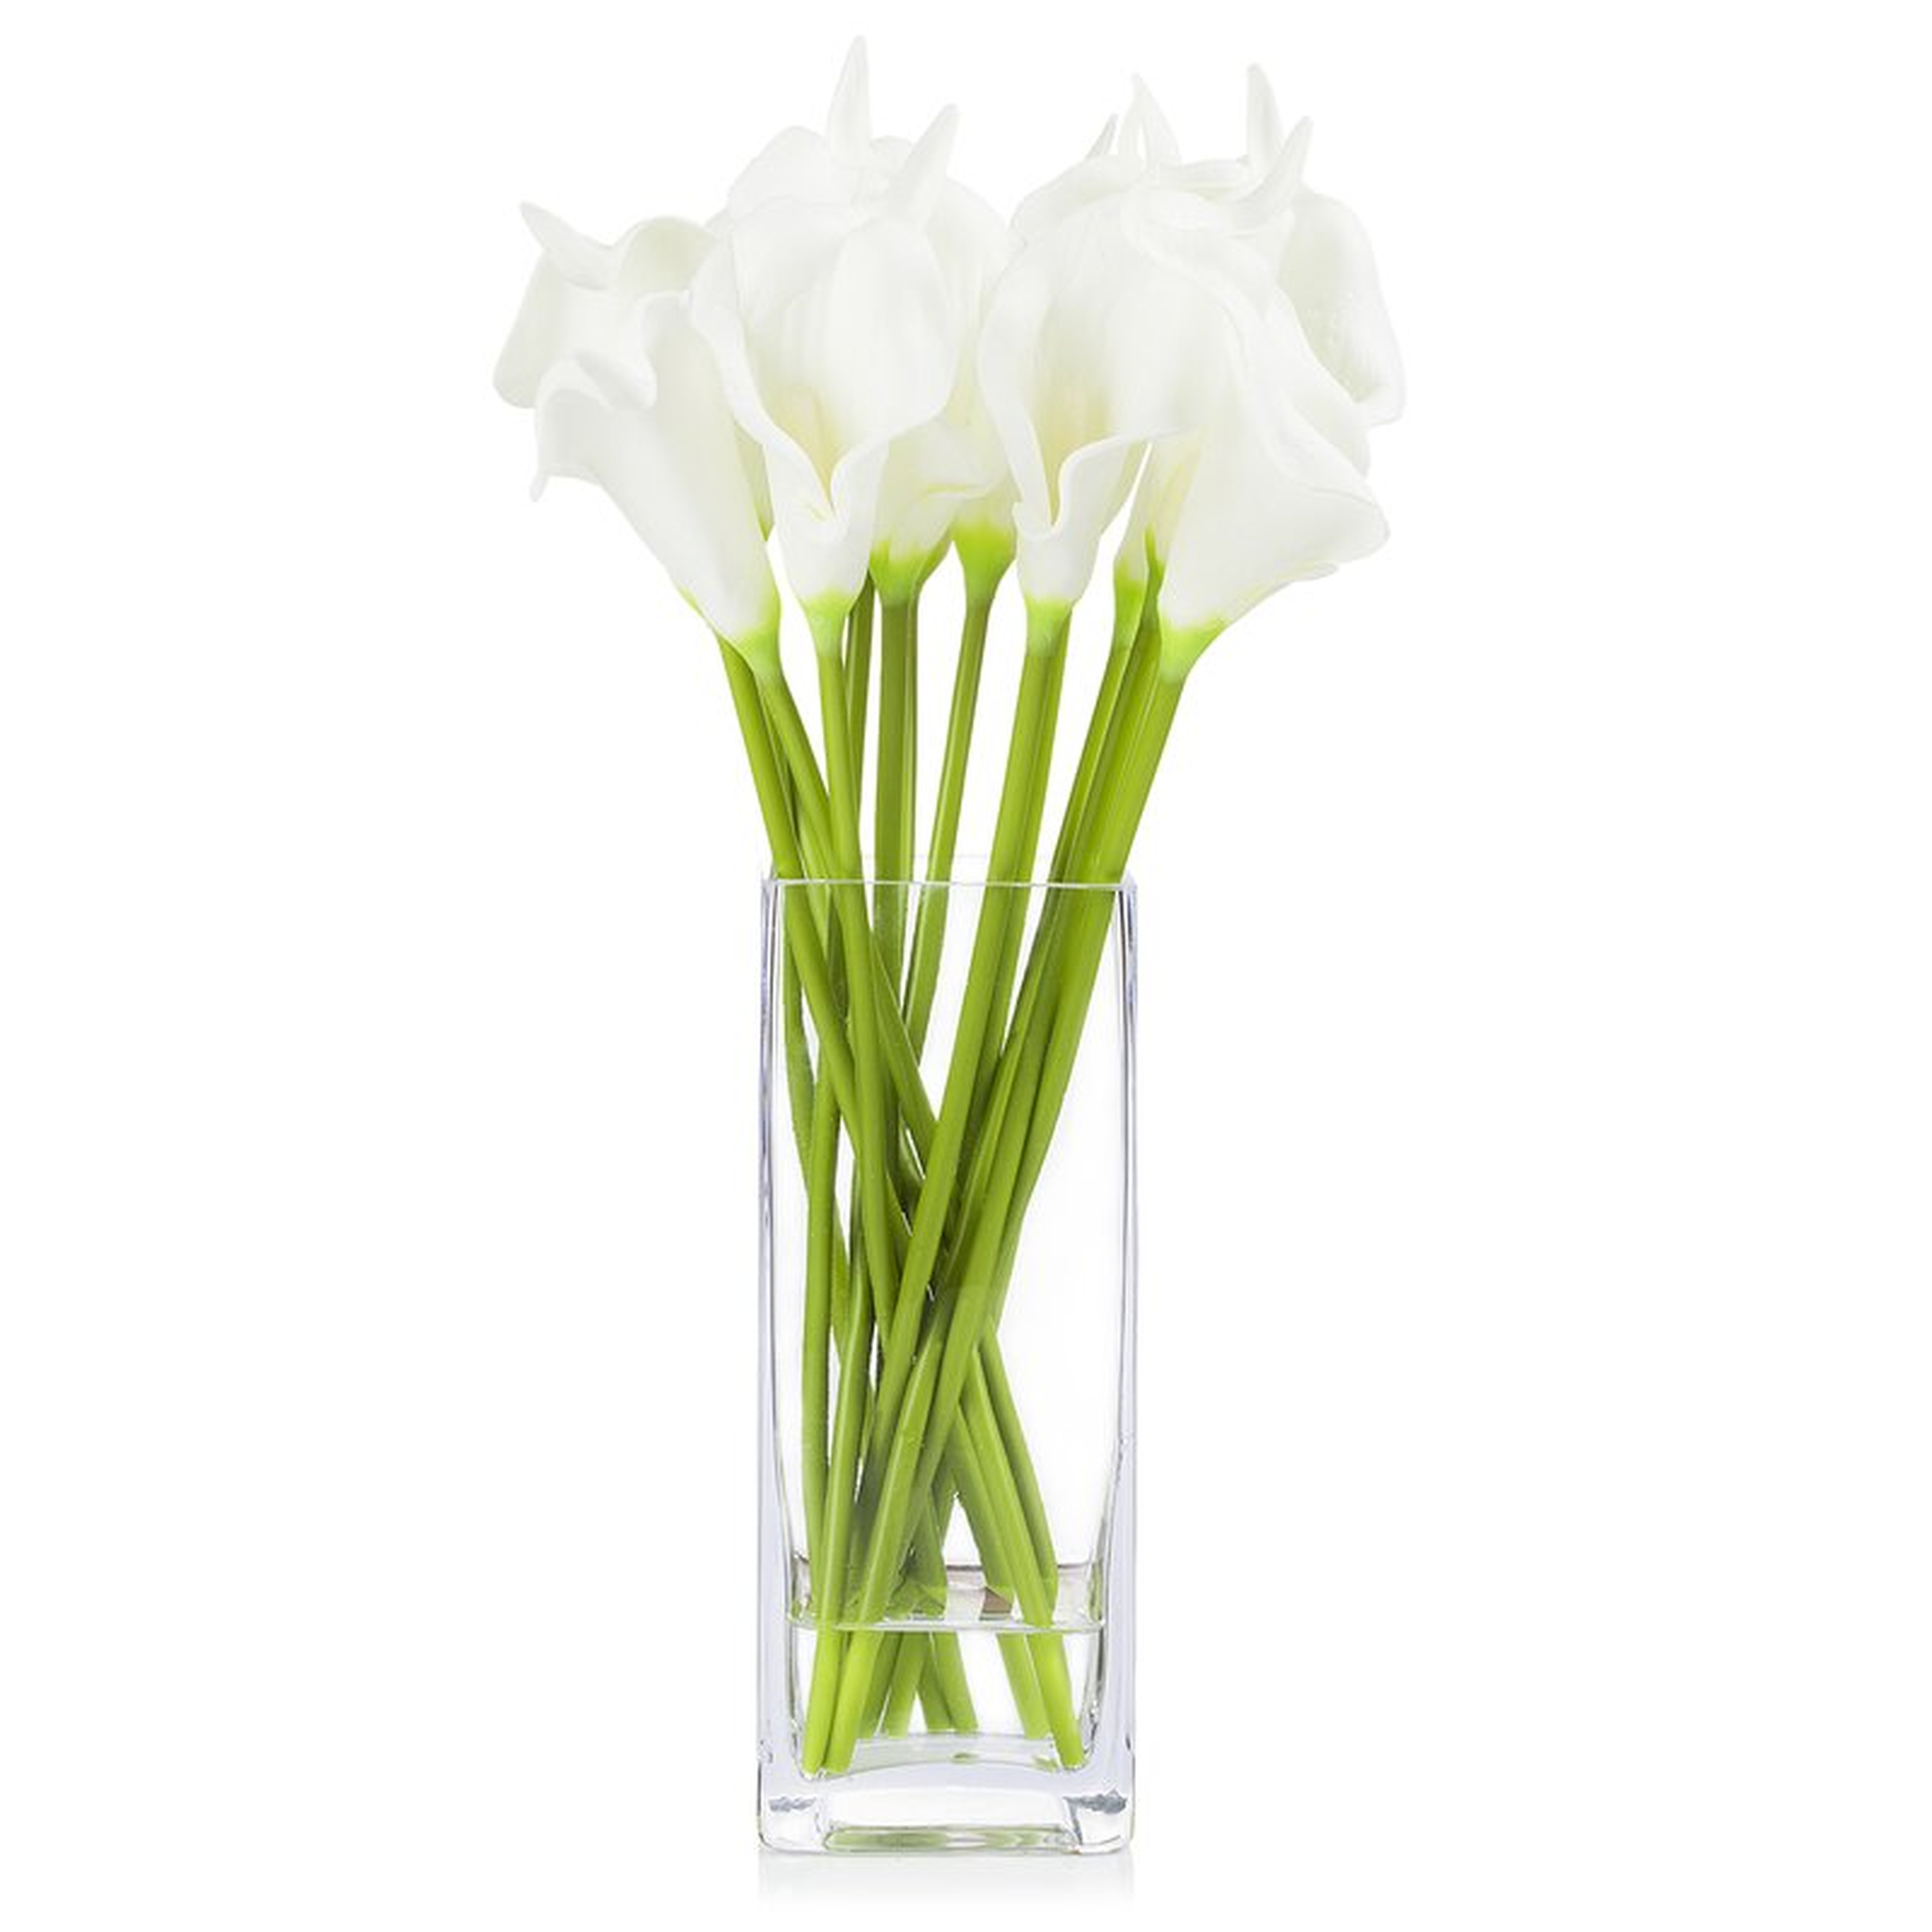 Artificial Real Touch Lilies Flower Arrangements in Vase  Artificial Real Touch Lilies Flower Arrangements in Vase  Artificial Real Touch Lilies Flower Arrangements in Vase  Artificial Real Touch Lilies Flower Arrangements in Vase - Wayfair